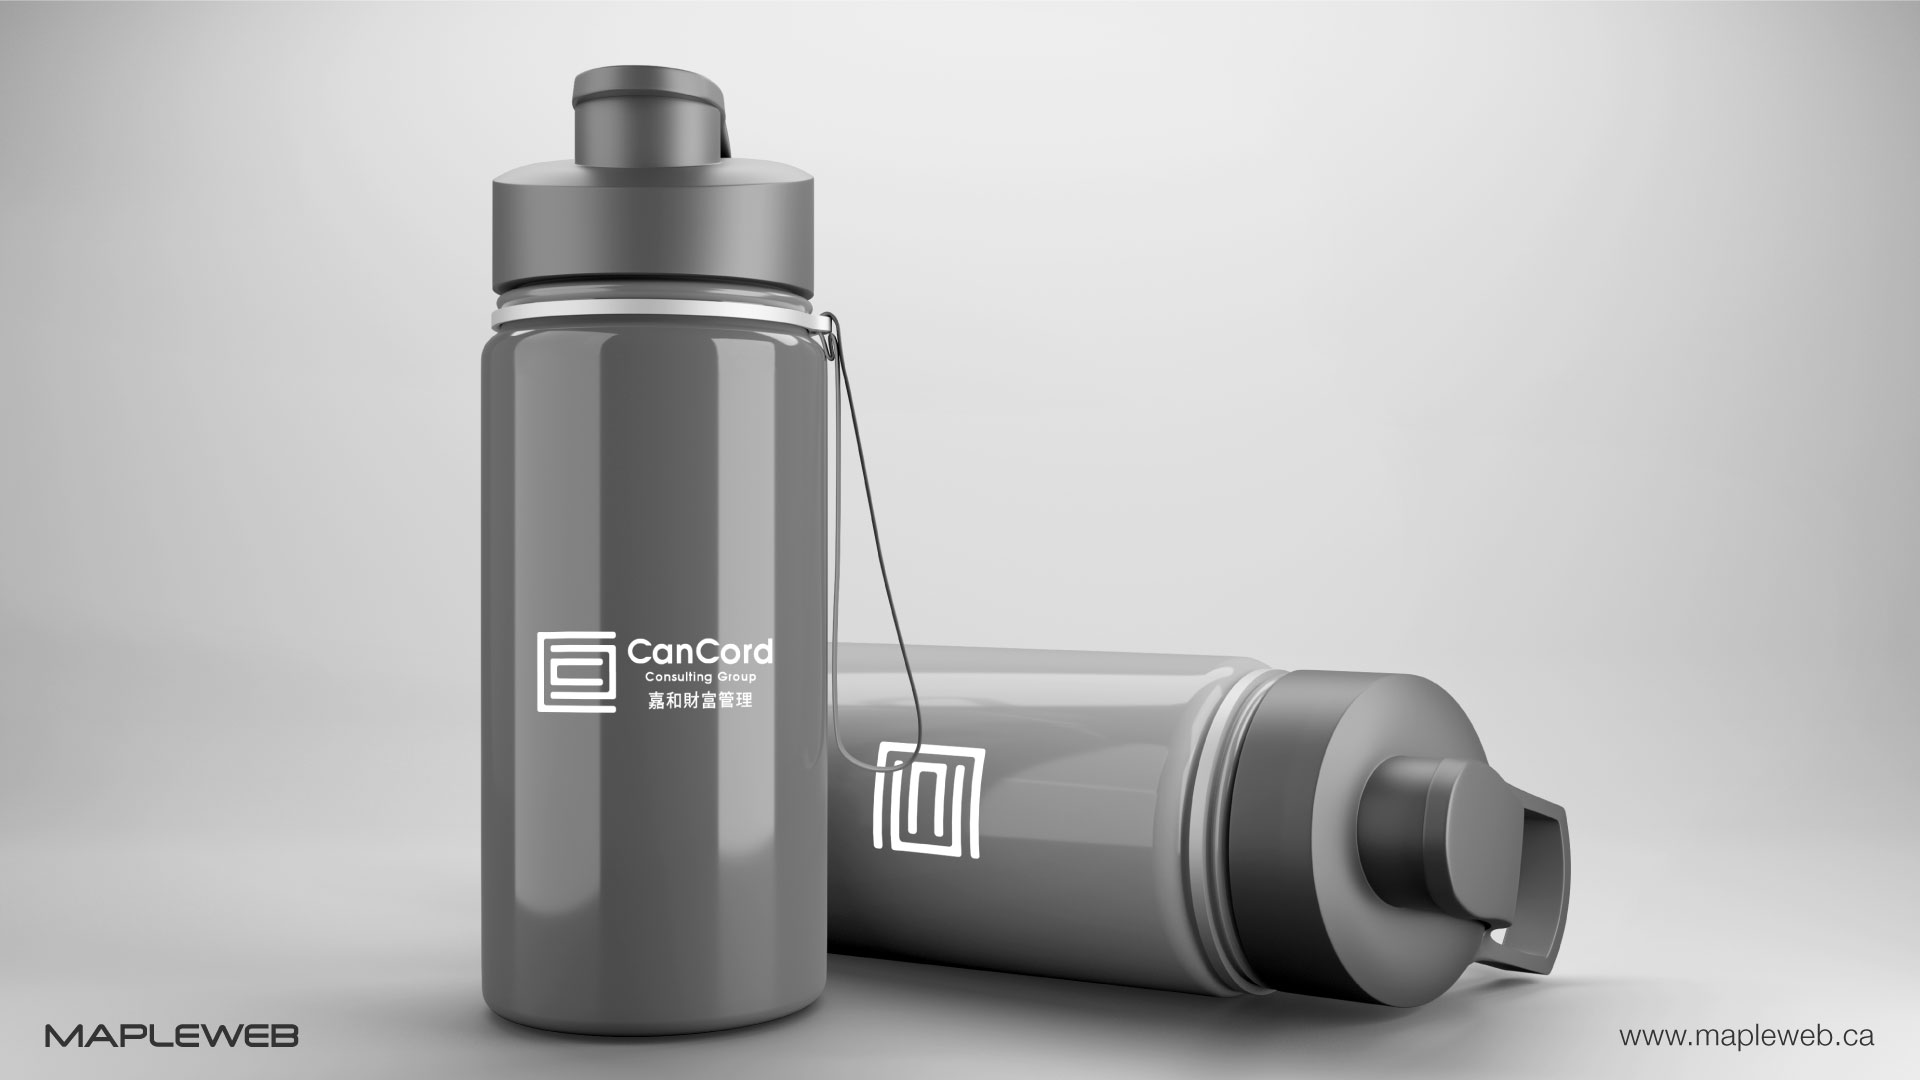 cancord-consulting-group-brand-logo-design-by-mapleweb-vancouver-canada-water-bottle-mock